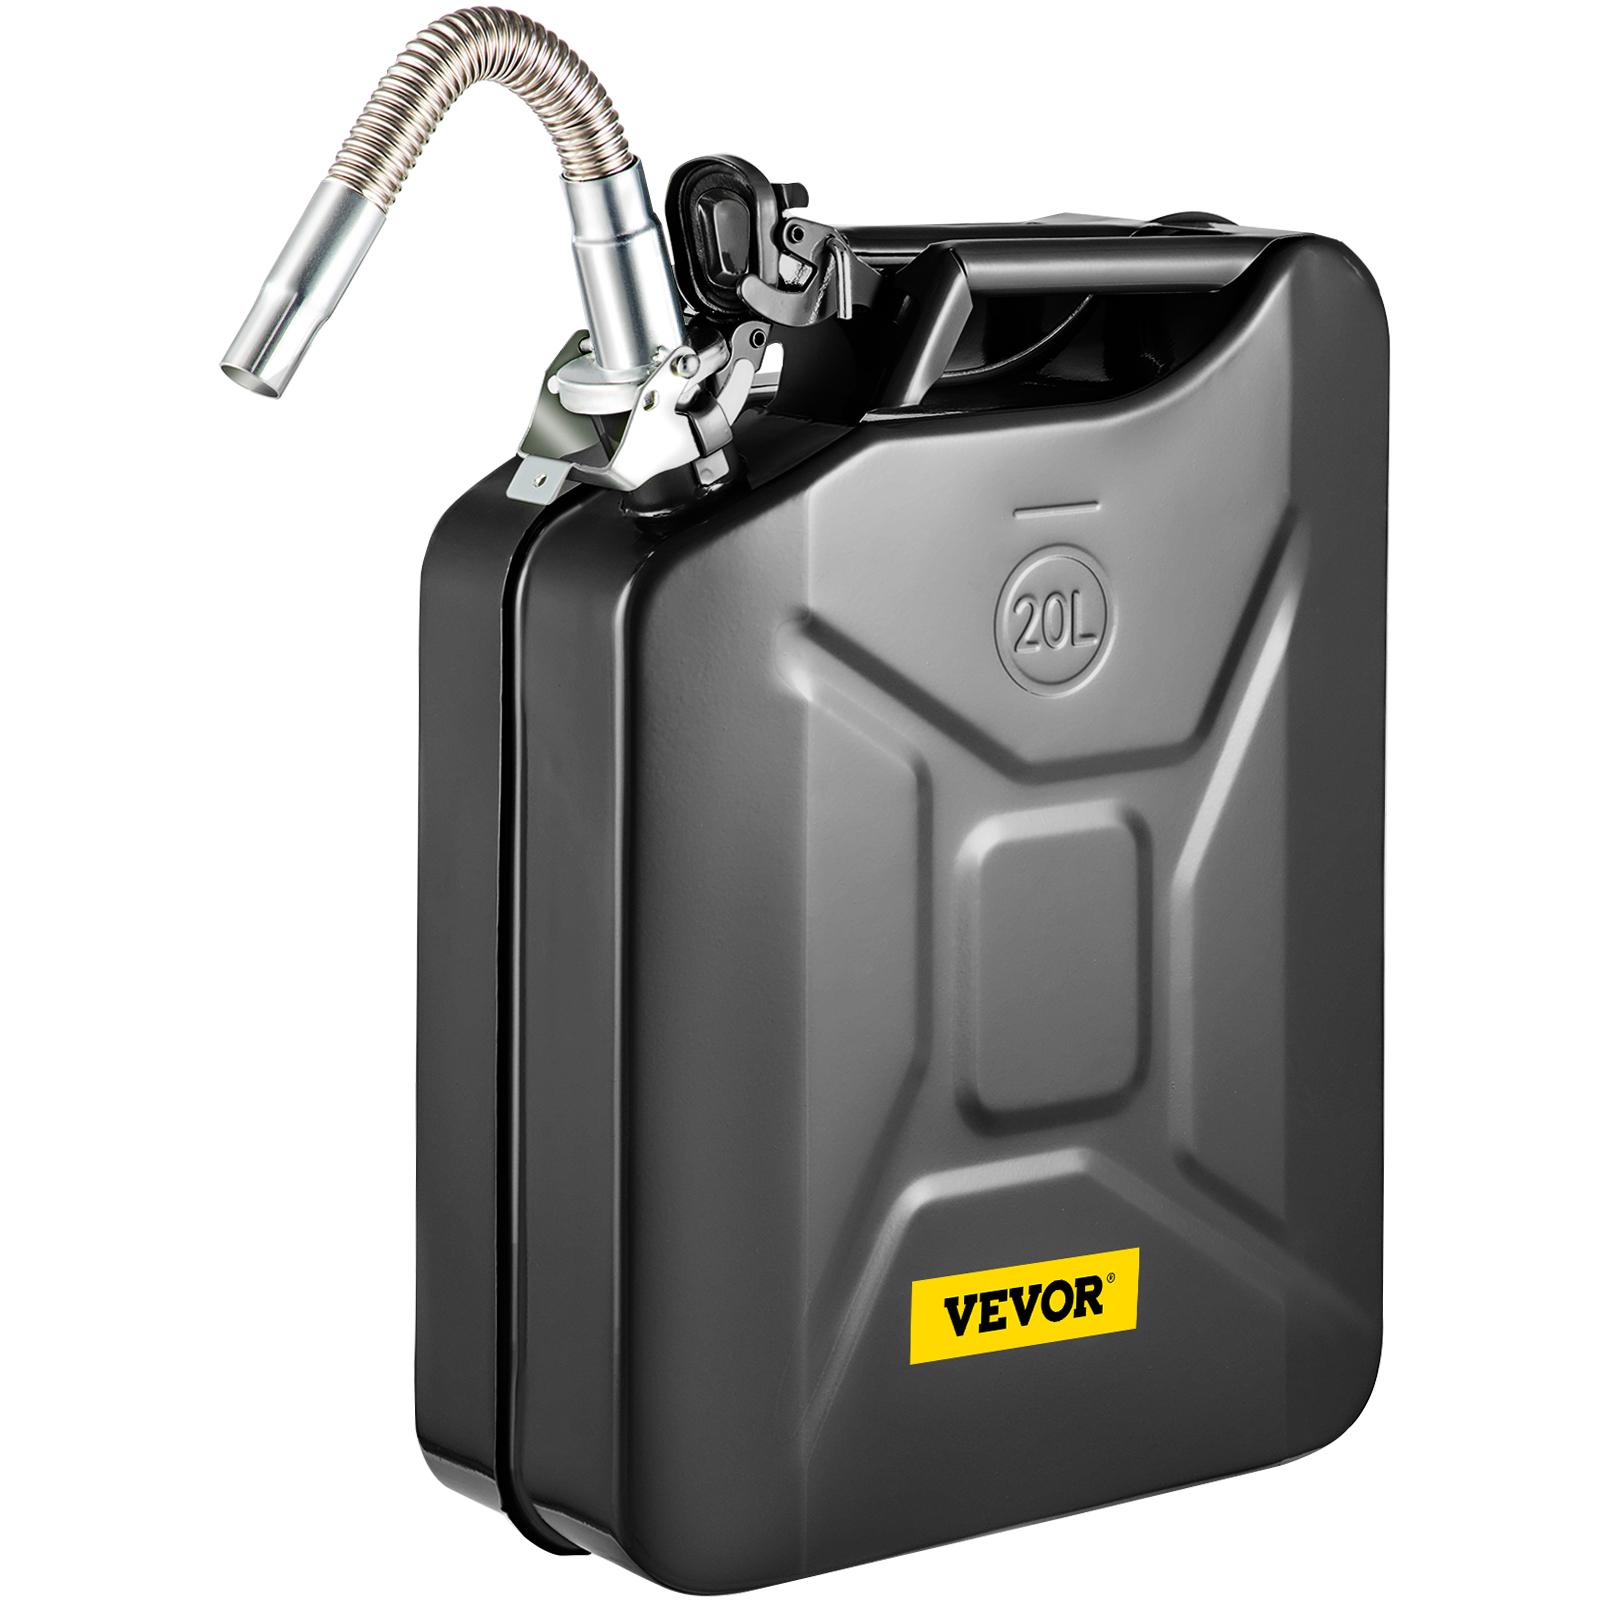 VEVOR Jerry Fuel Can, 5.3 Gallon / 20 L Portable Jerry Gas Can with Flexible Spout System, Rustproof Heat-Resistant Steel Fue